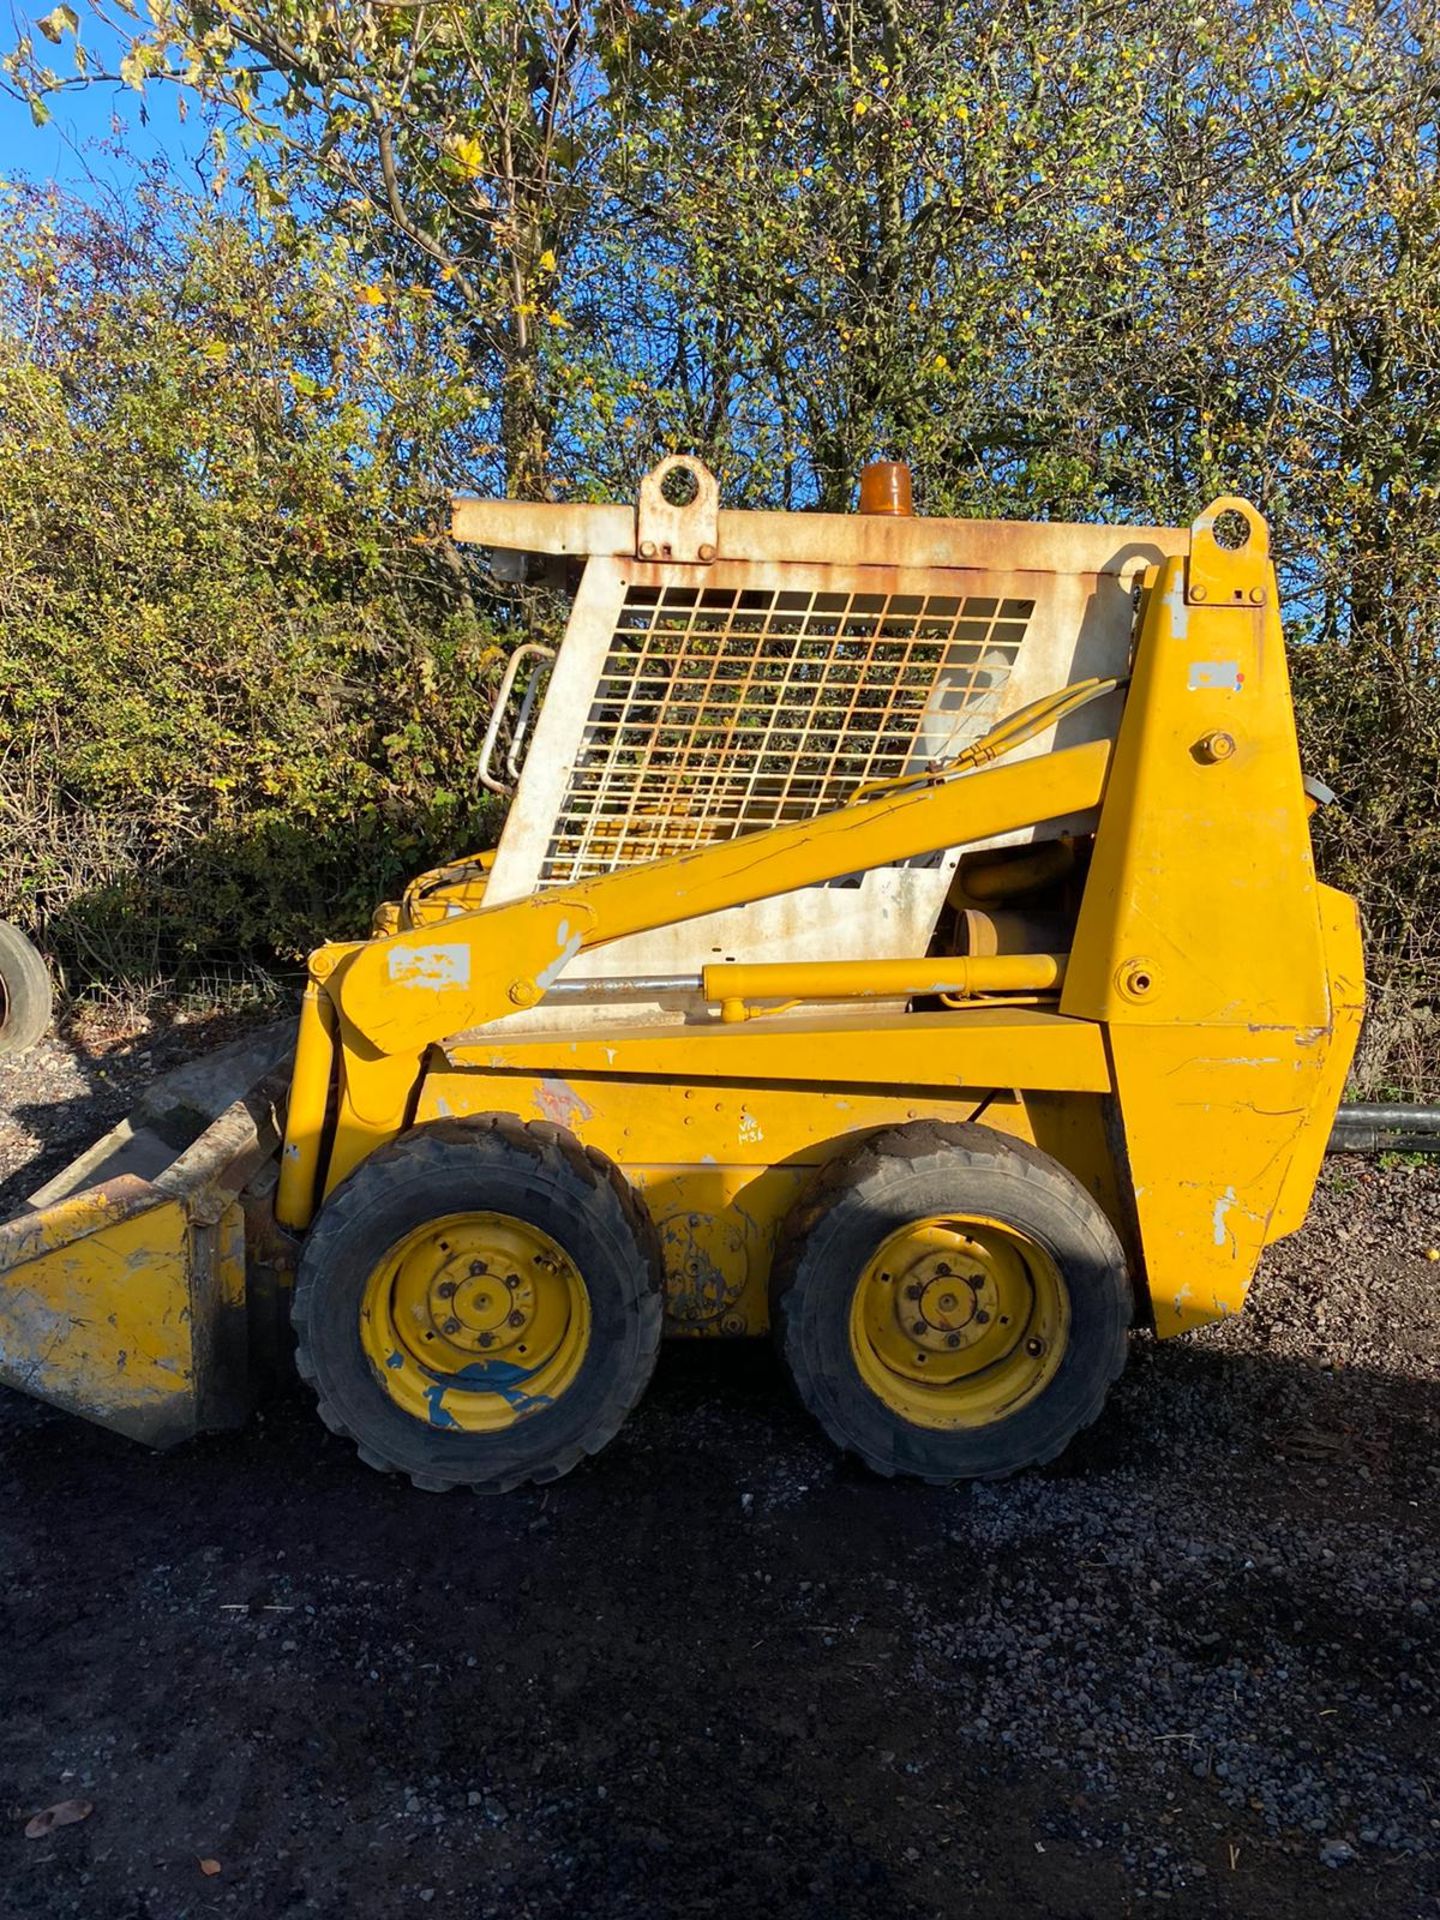 CASE 1840 SKID STEER LOADER, STARTS FIRST TURN OF THE KEY, RUNS, DRIVES AND LIFTS *PLUS VAT* - Image 6 of 9